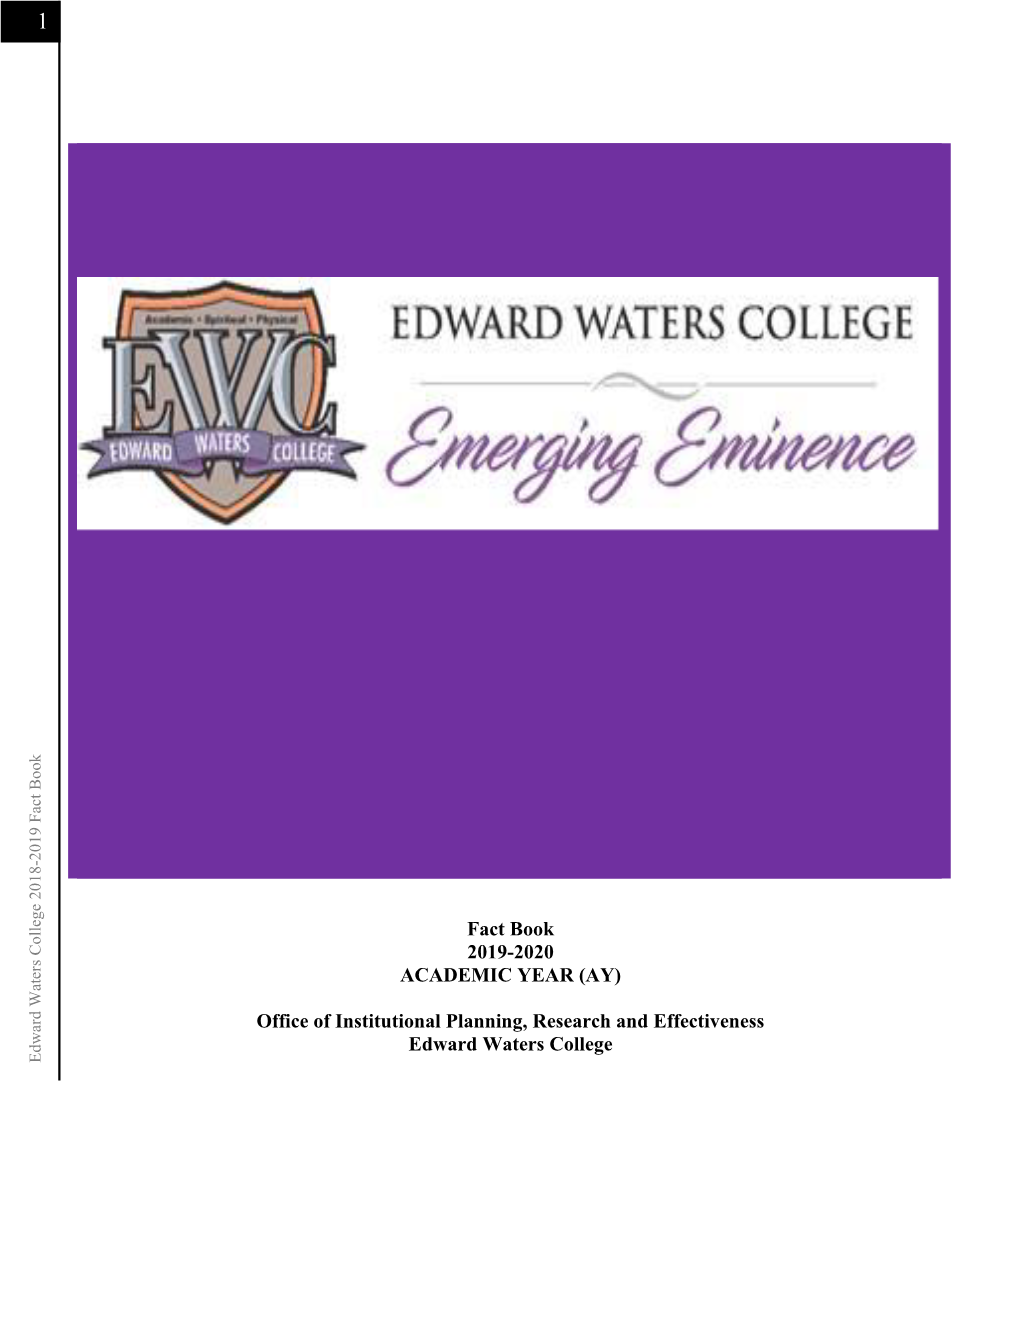 Edward Waters College 2018-2019 Fact Book 1